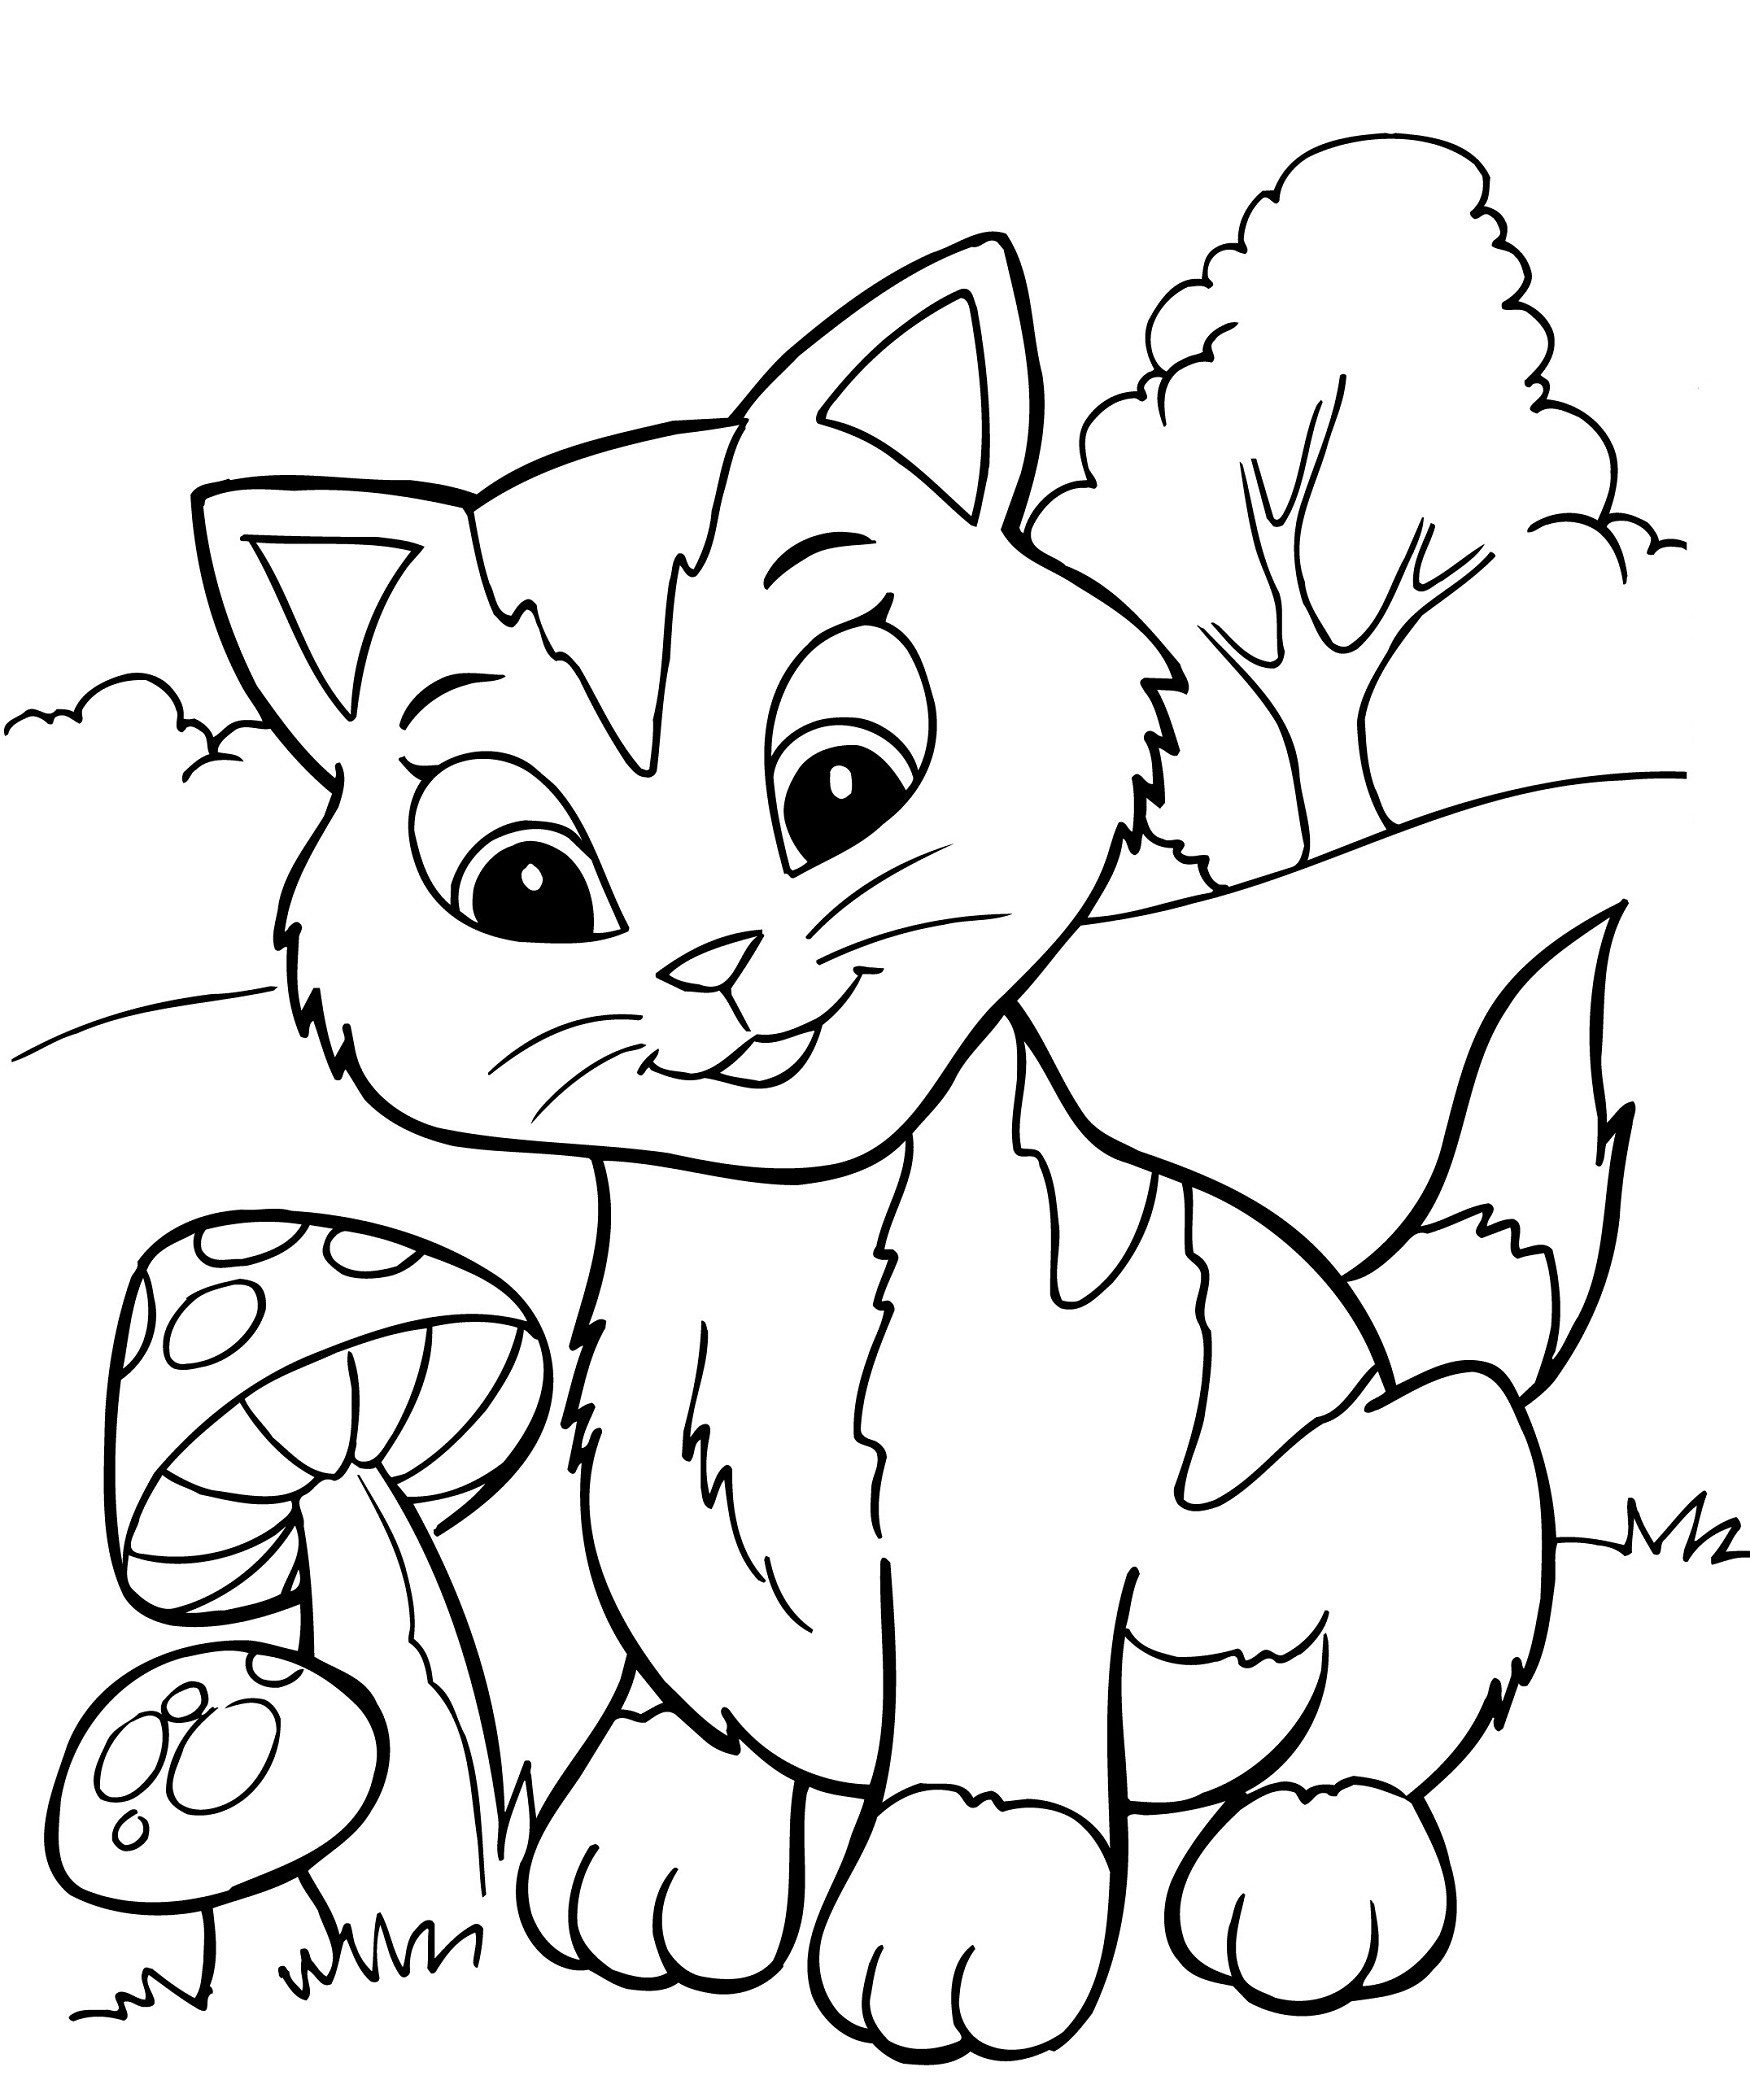 Coloring Sheets For Kids Pdf
 Printable Coloring Book Pages for Kids Gallery